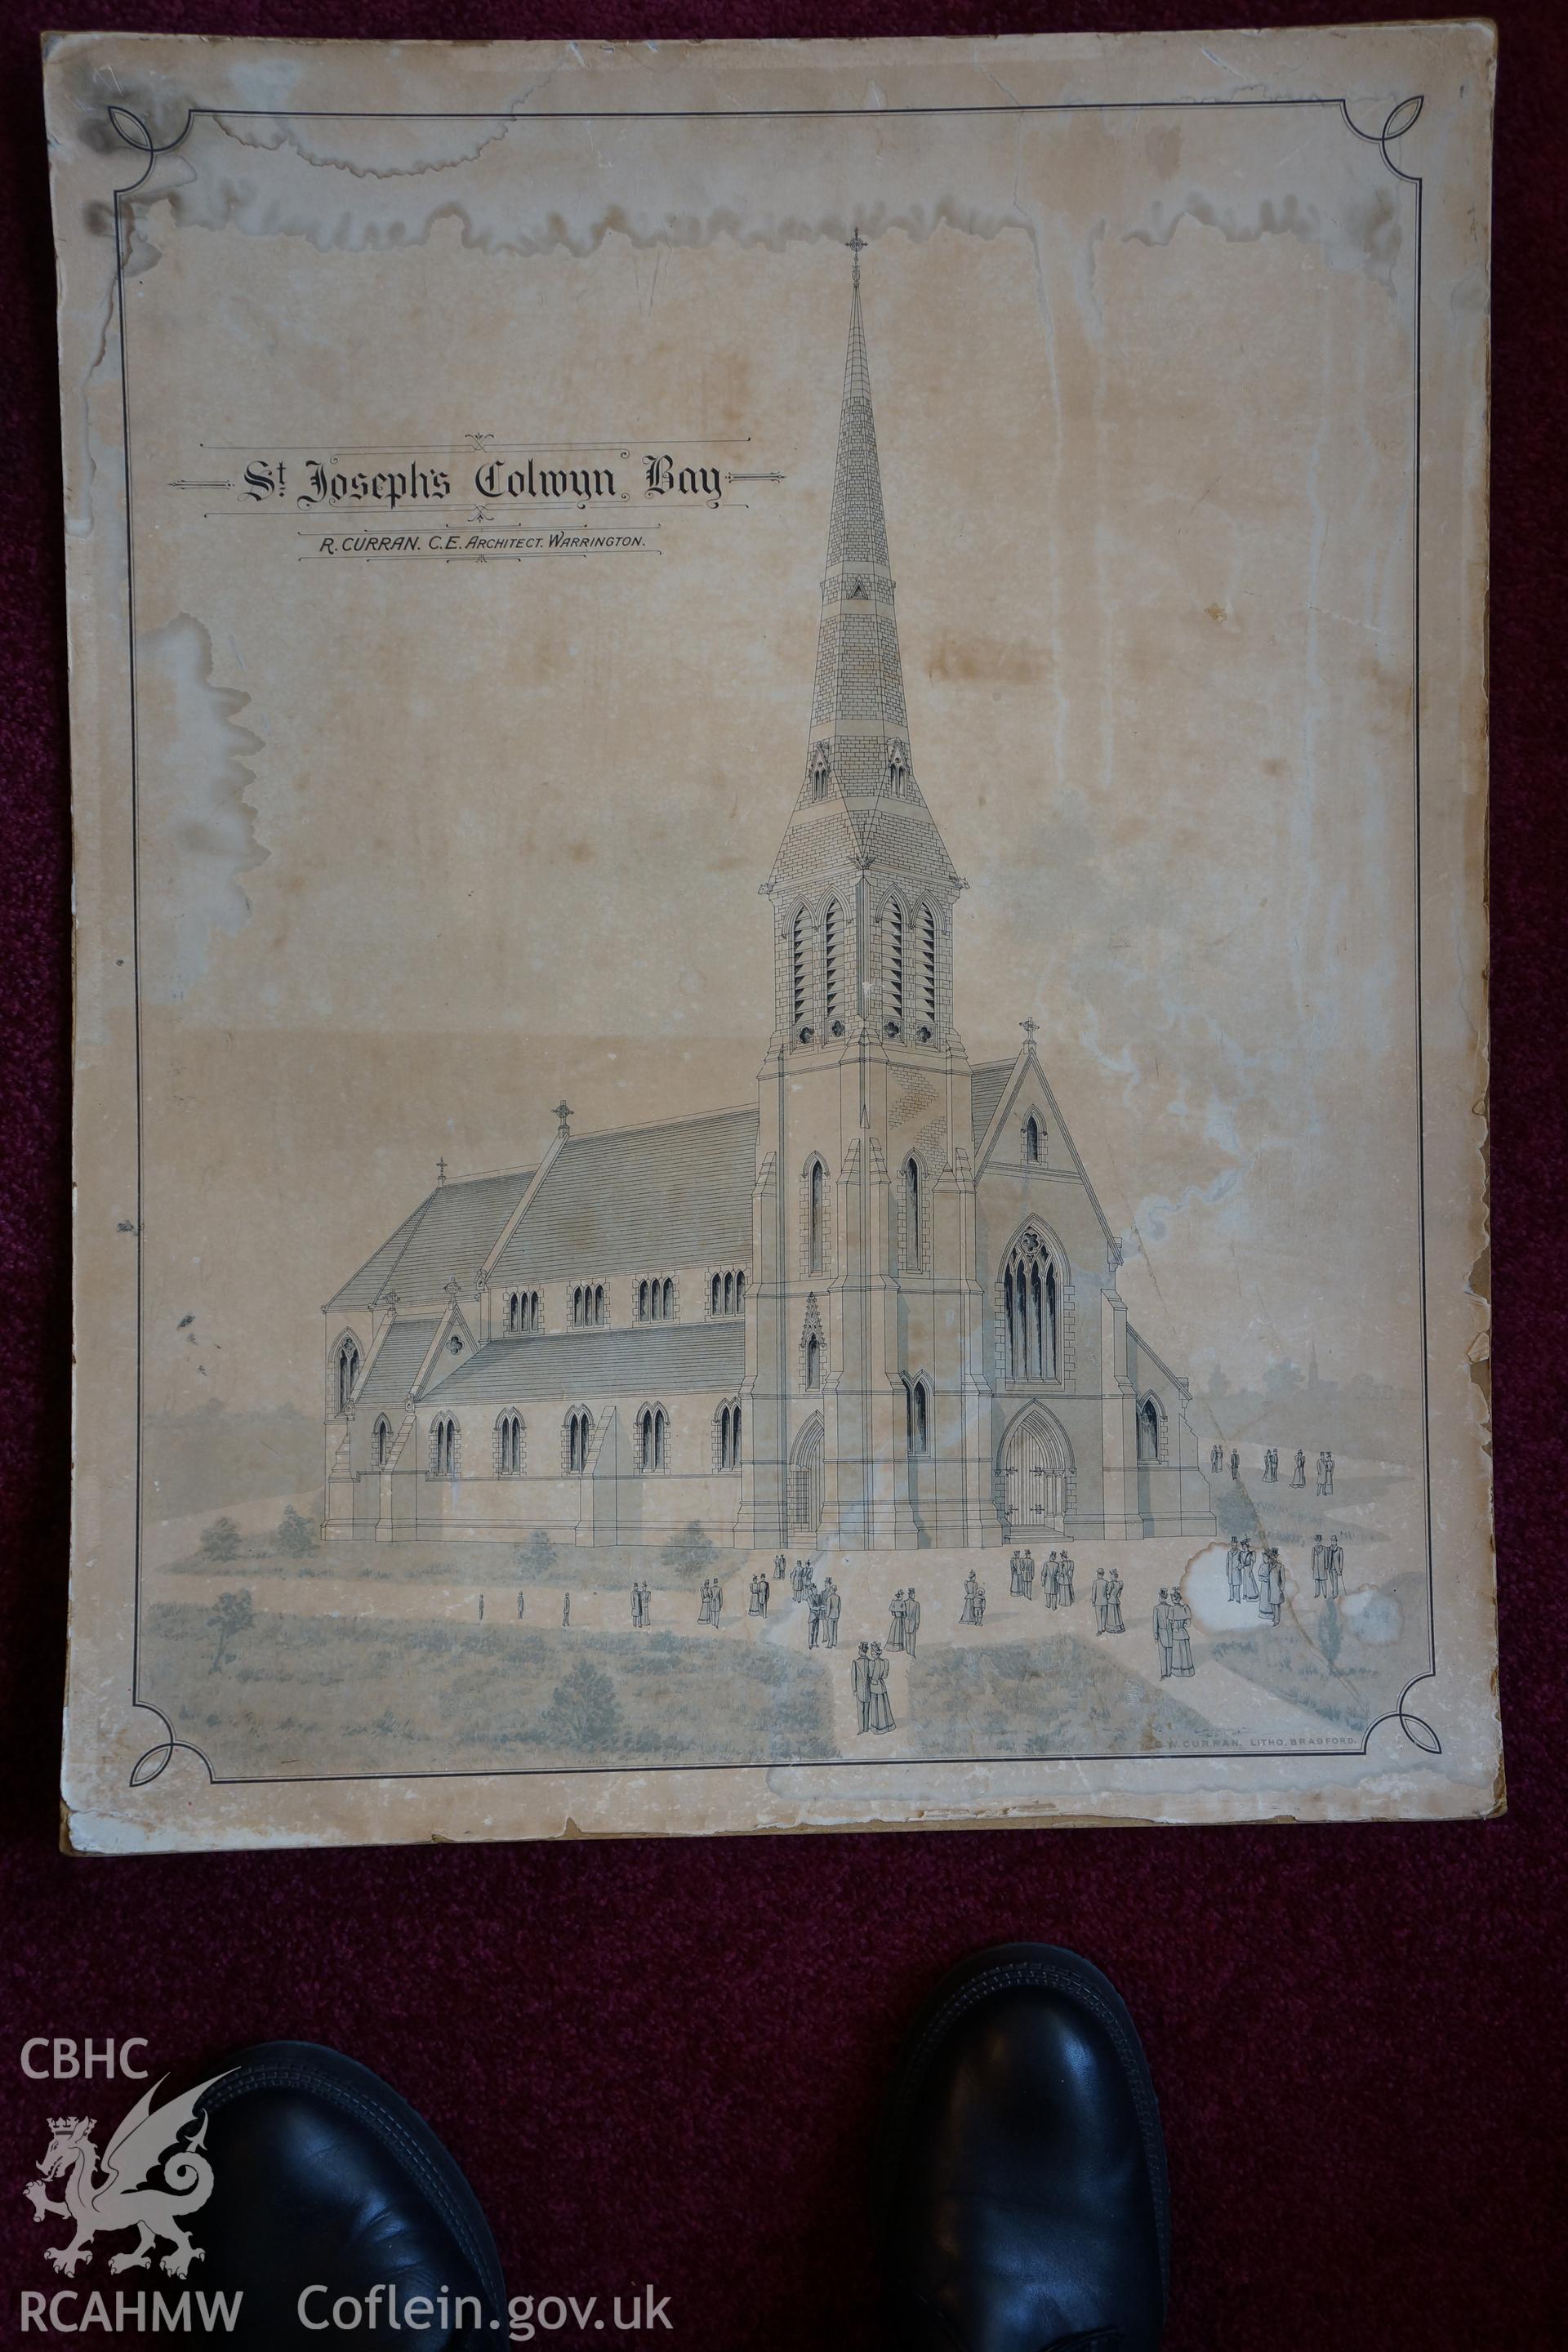 Digital colour photograph showing undated engraving at St Joseph's Catholic church, Colwyn Bay.